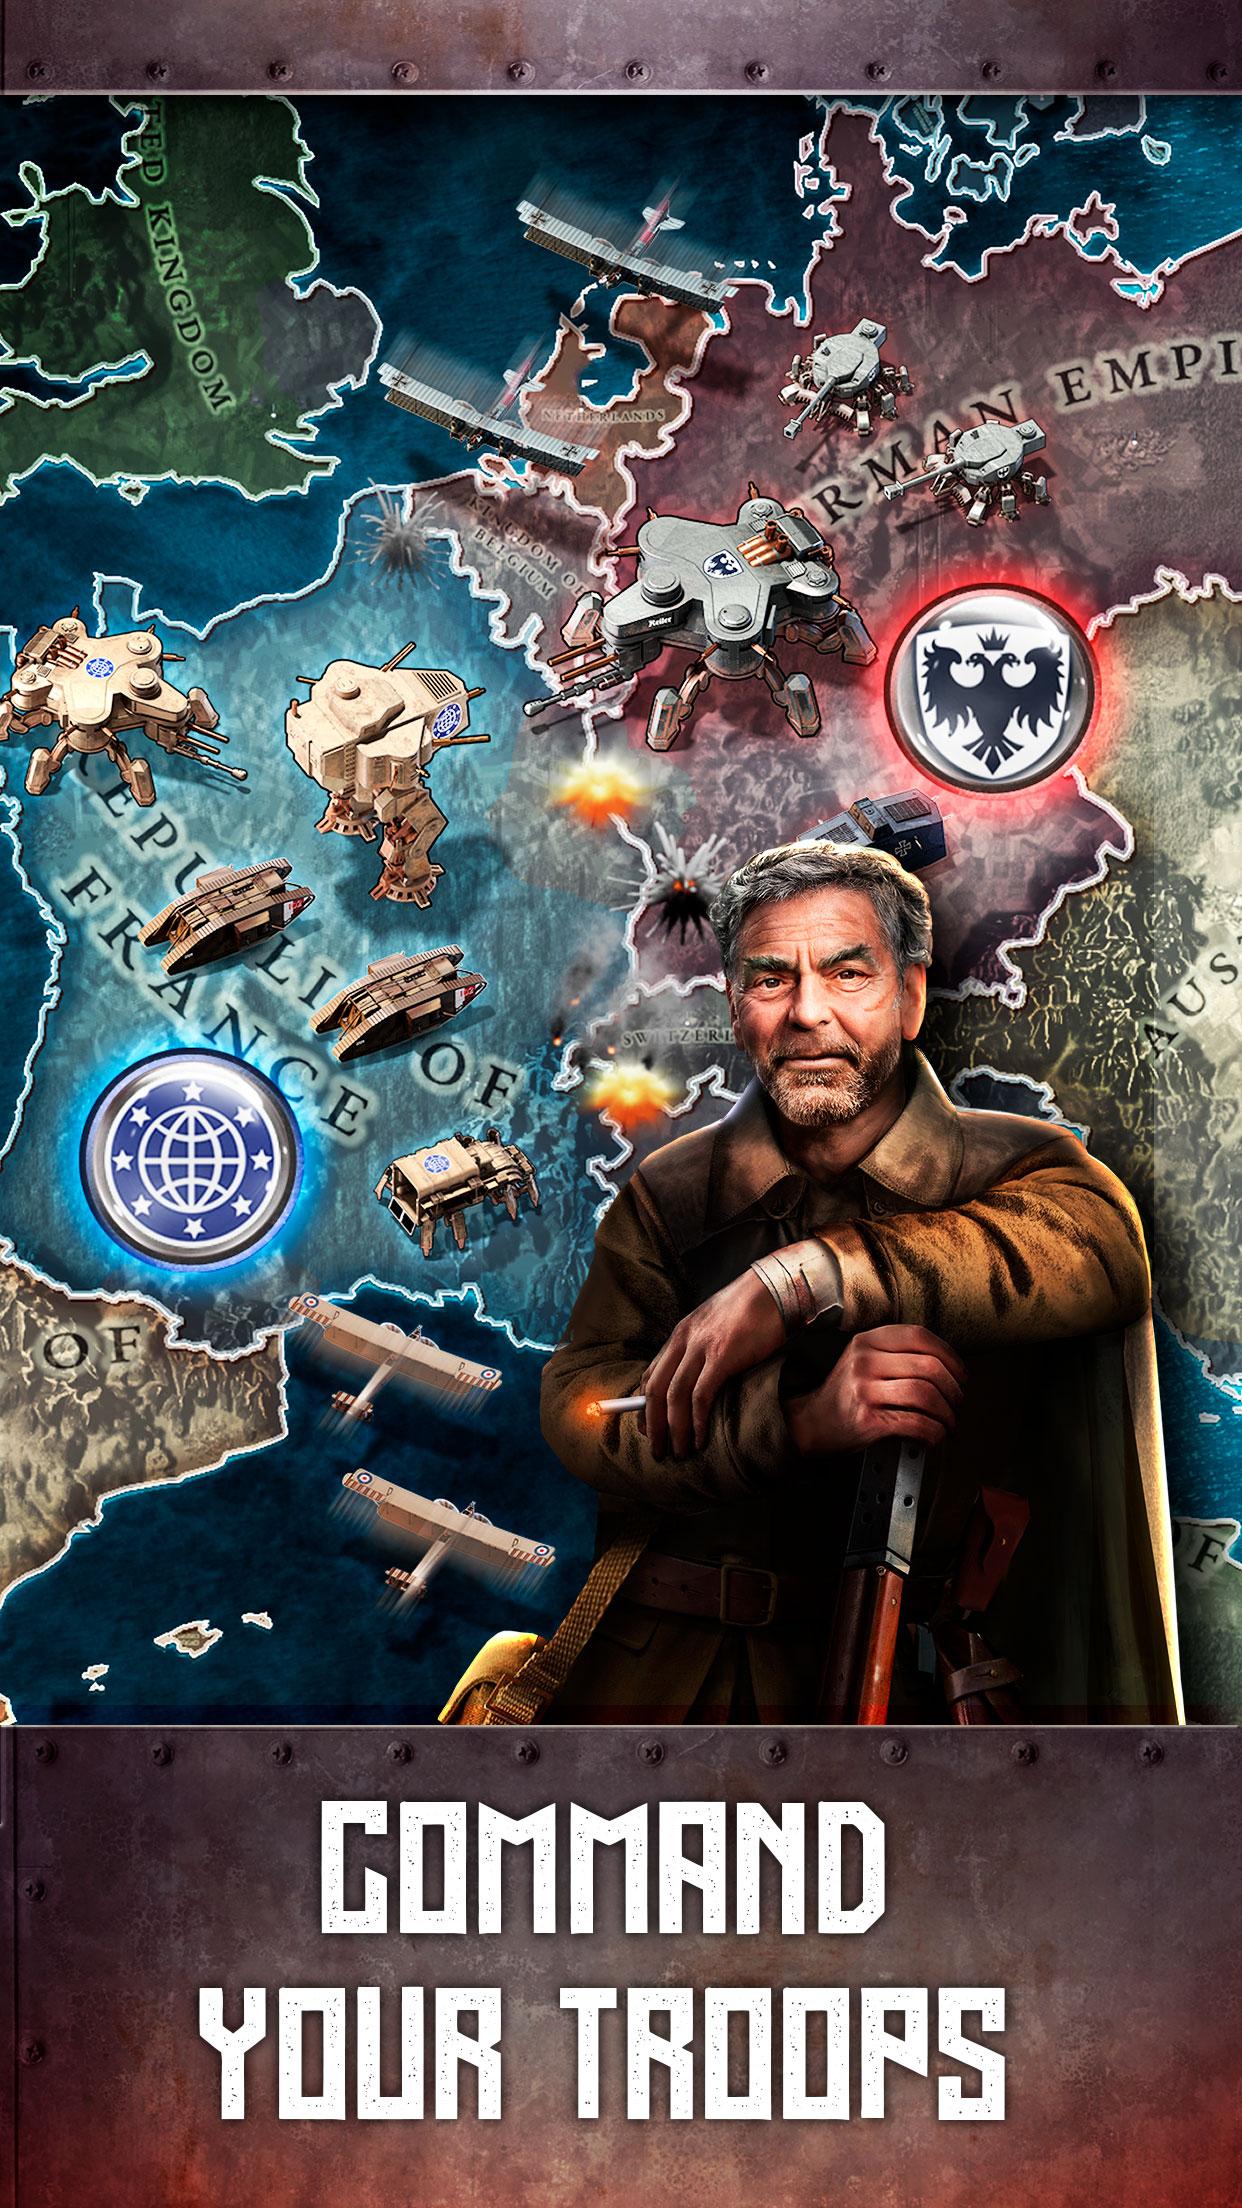 Iron Order 1919 - Altered History Strategy Game 0.114 Screenshot 2